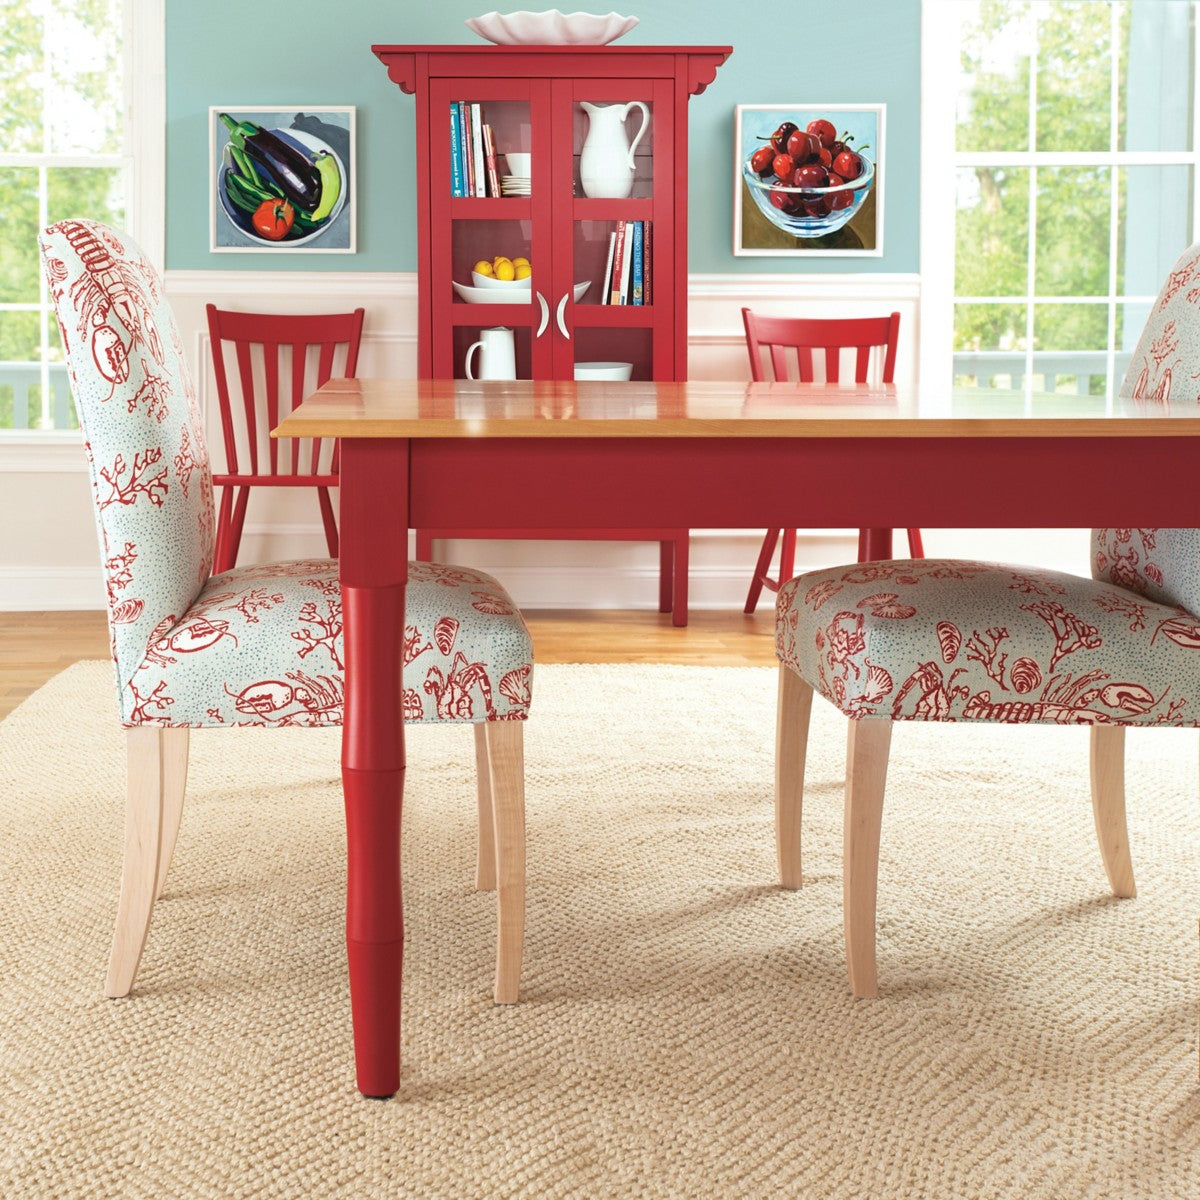 Maine Cottage Breakers Extension Dining Table | Maine Cottage® 